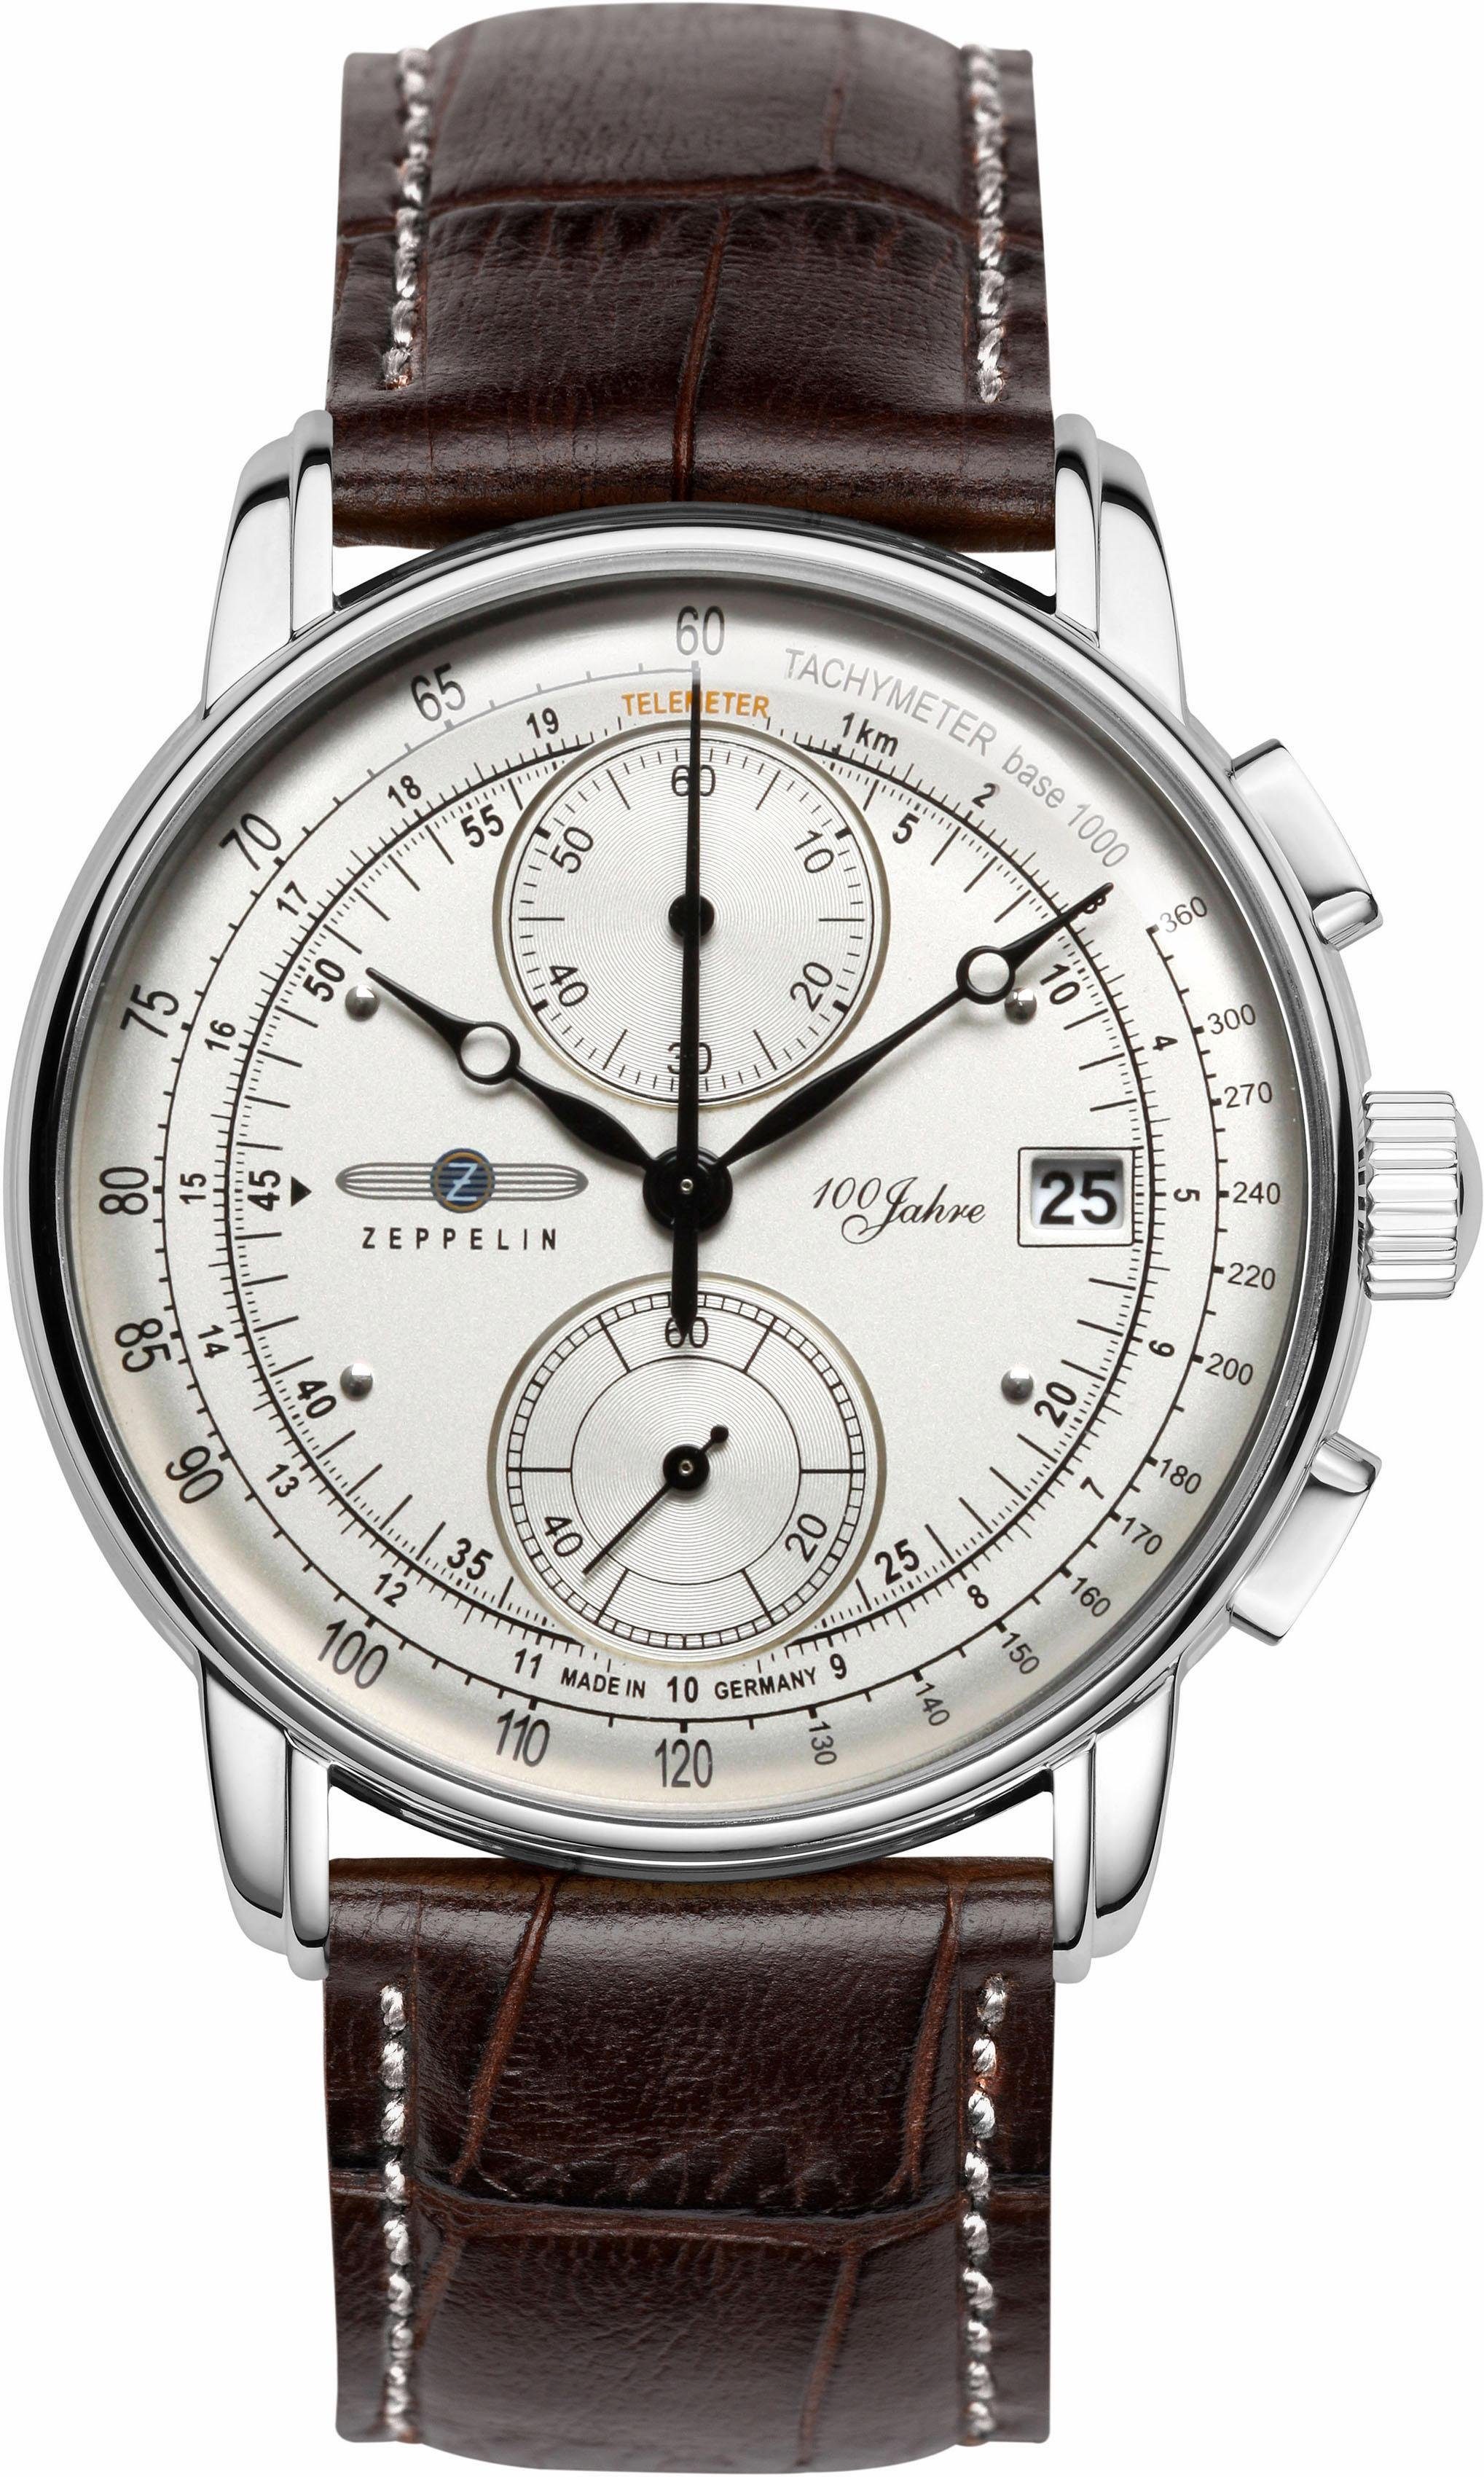 ZEPPELIN Chronograph 100 Jahre Zeppelin, 86701, in Germany made